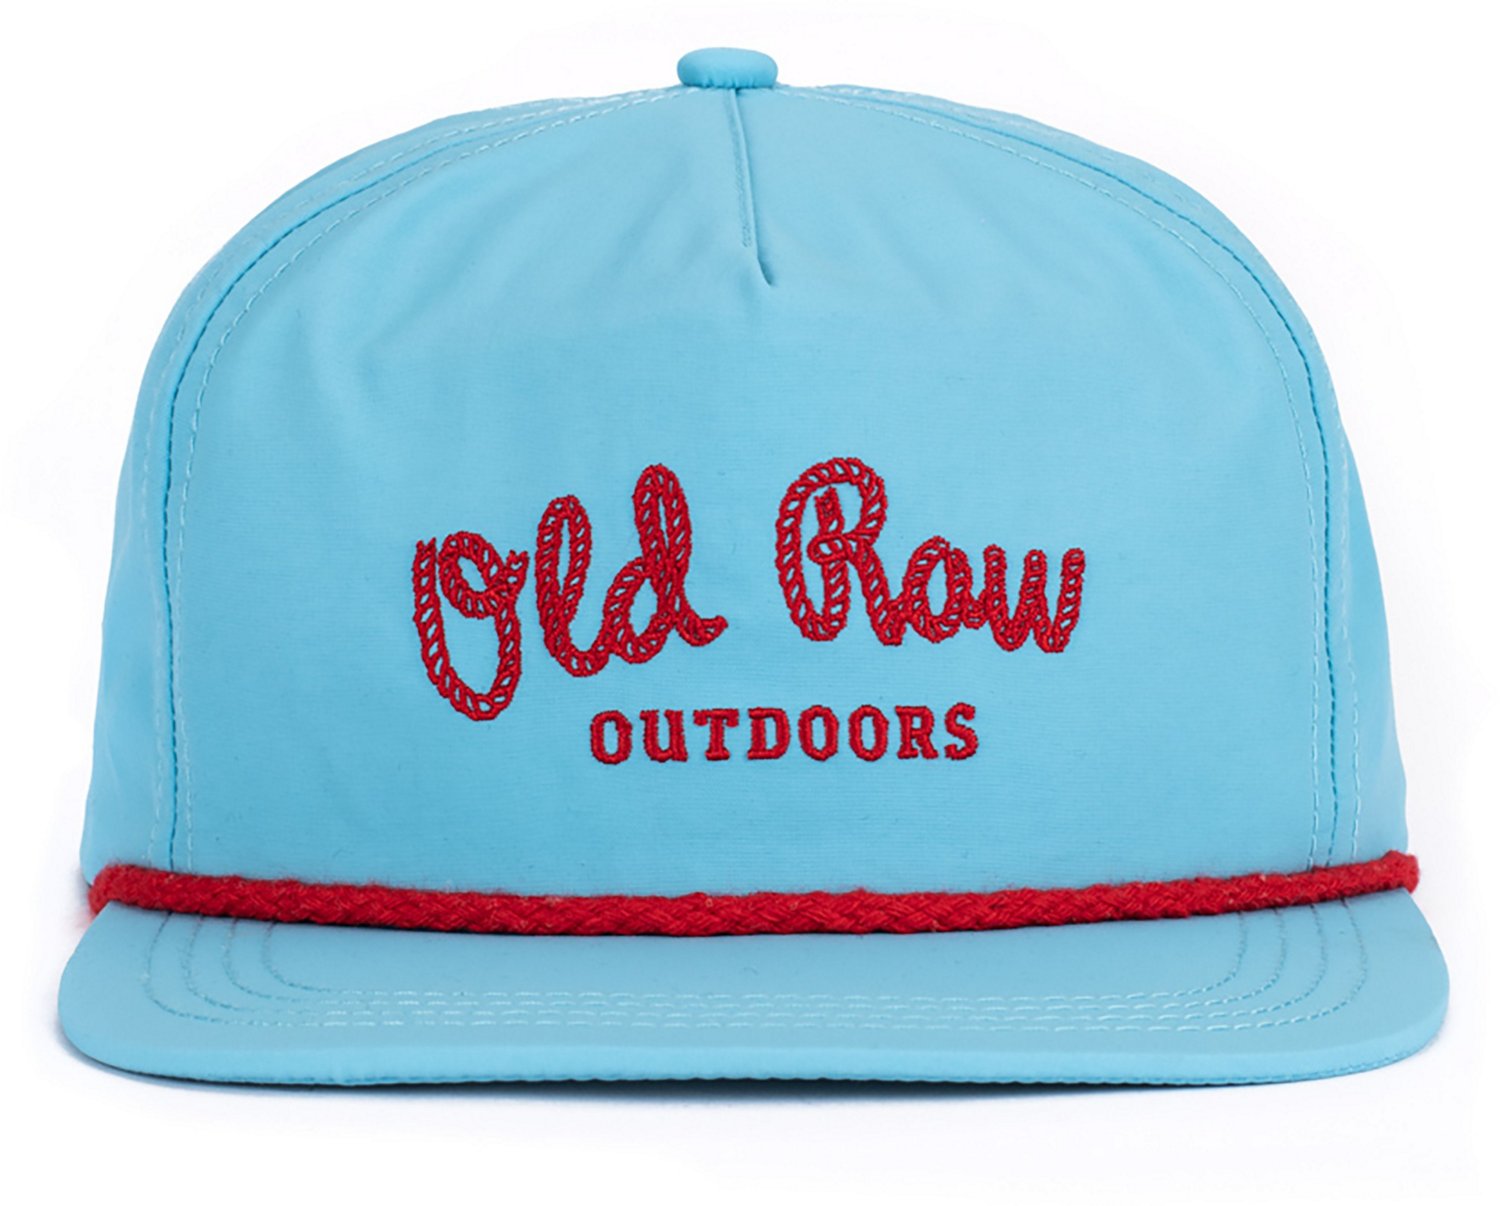 Old Row Men's Outdoors Twill Stitch Rope Cap